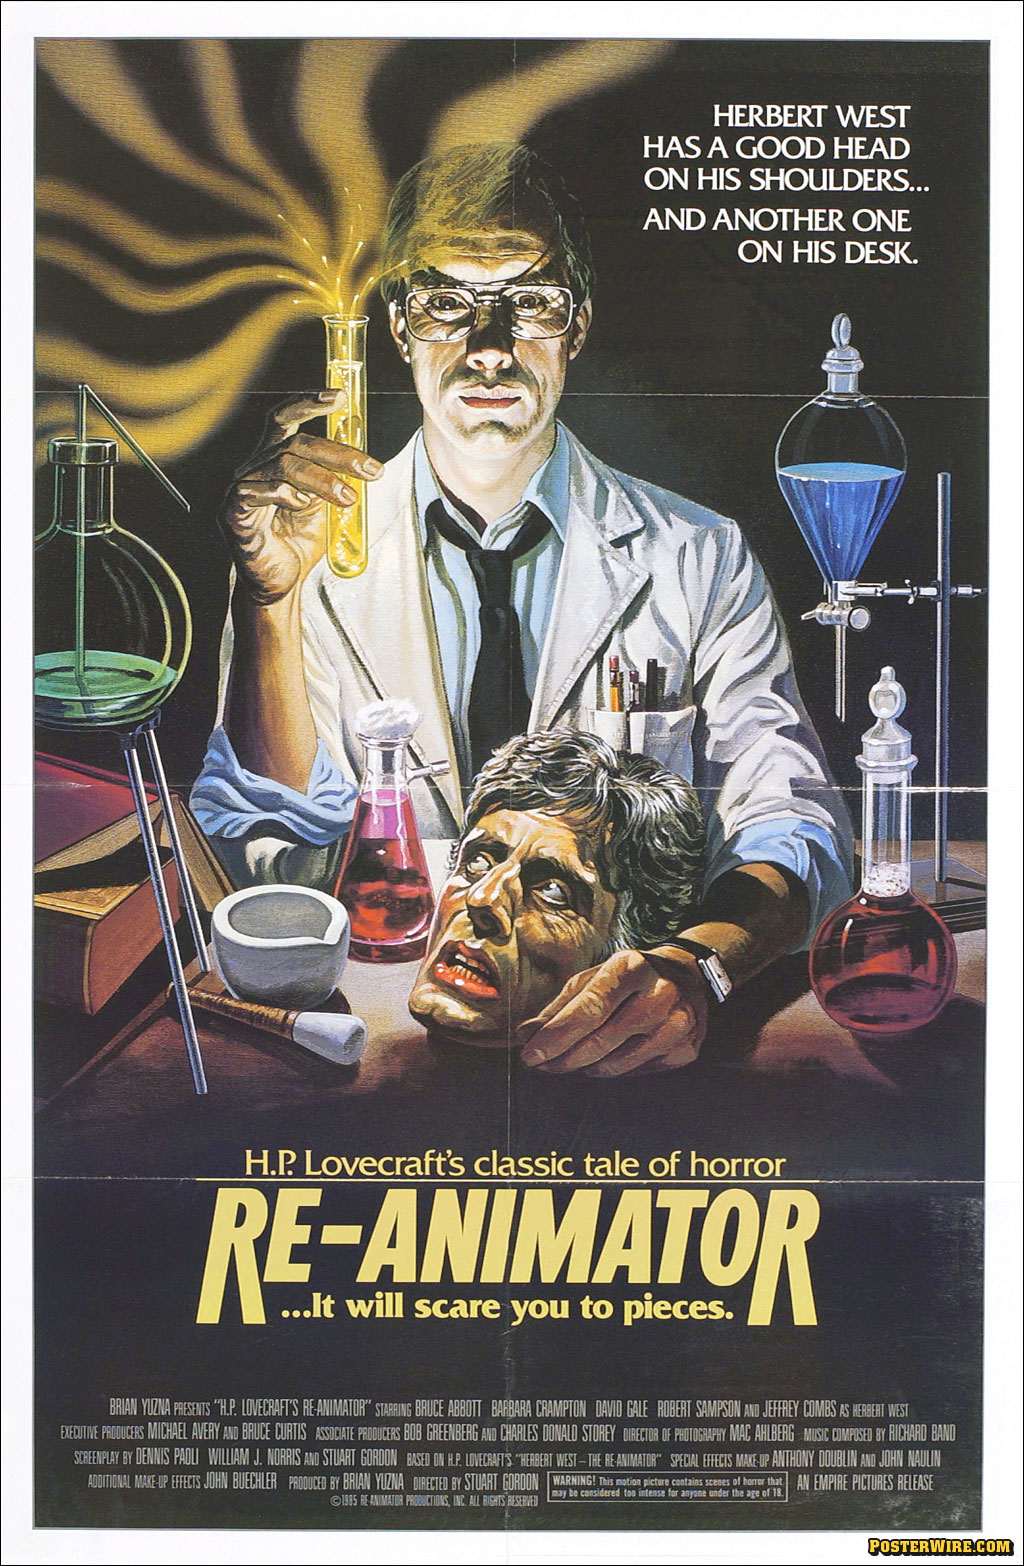 http://posterwire.com/wp-content/images/re-animator.jpg